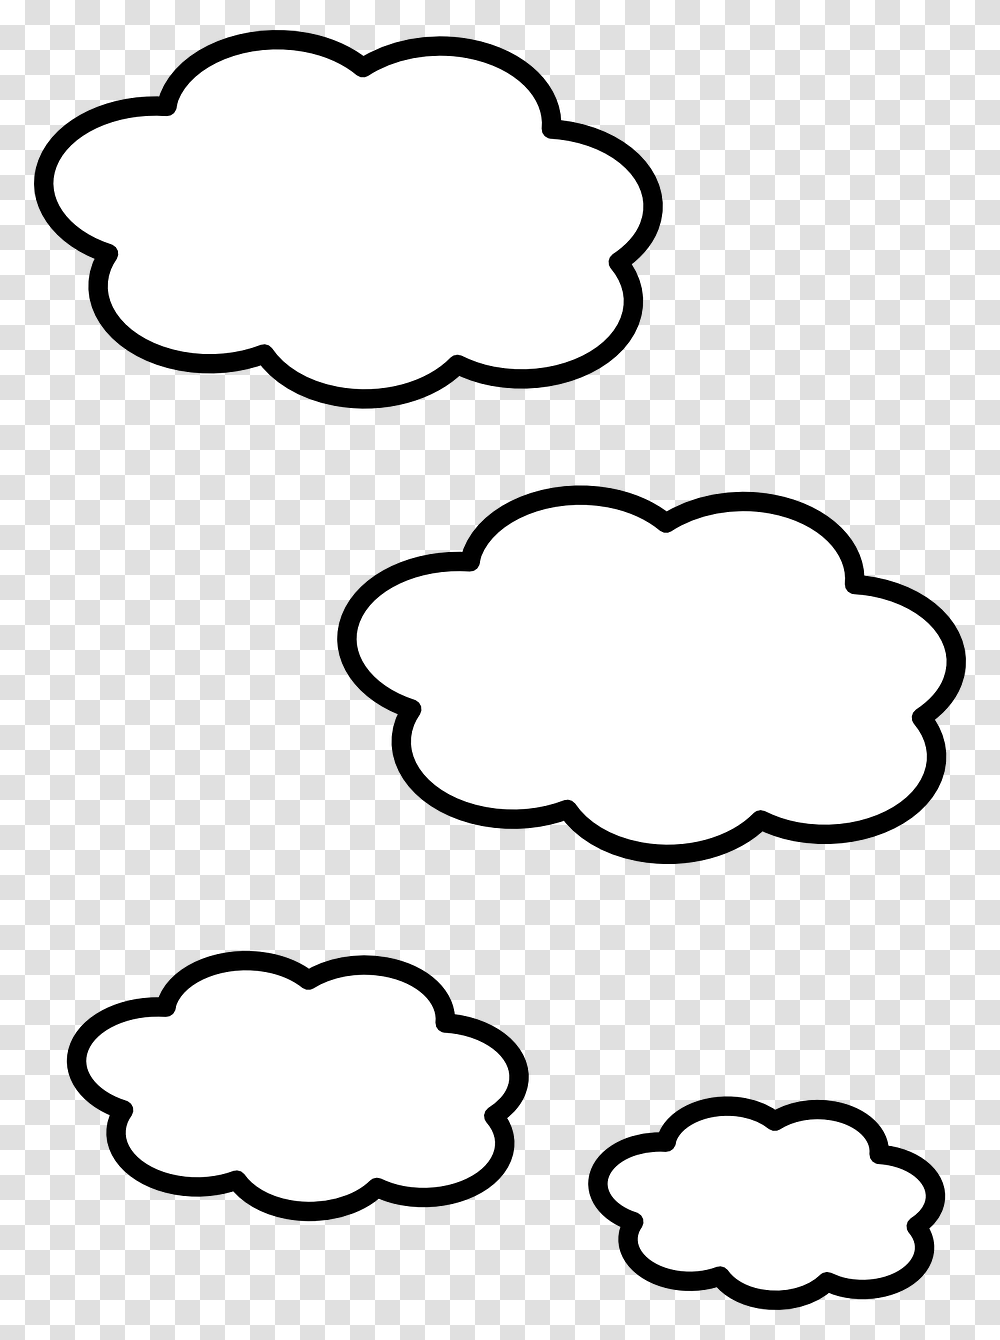 Cloud White Shapes Free Picture Clip Art Clouds Black And White, Stencil, Silhouette, Texture Transparent Png